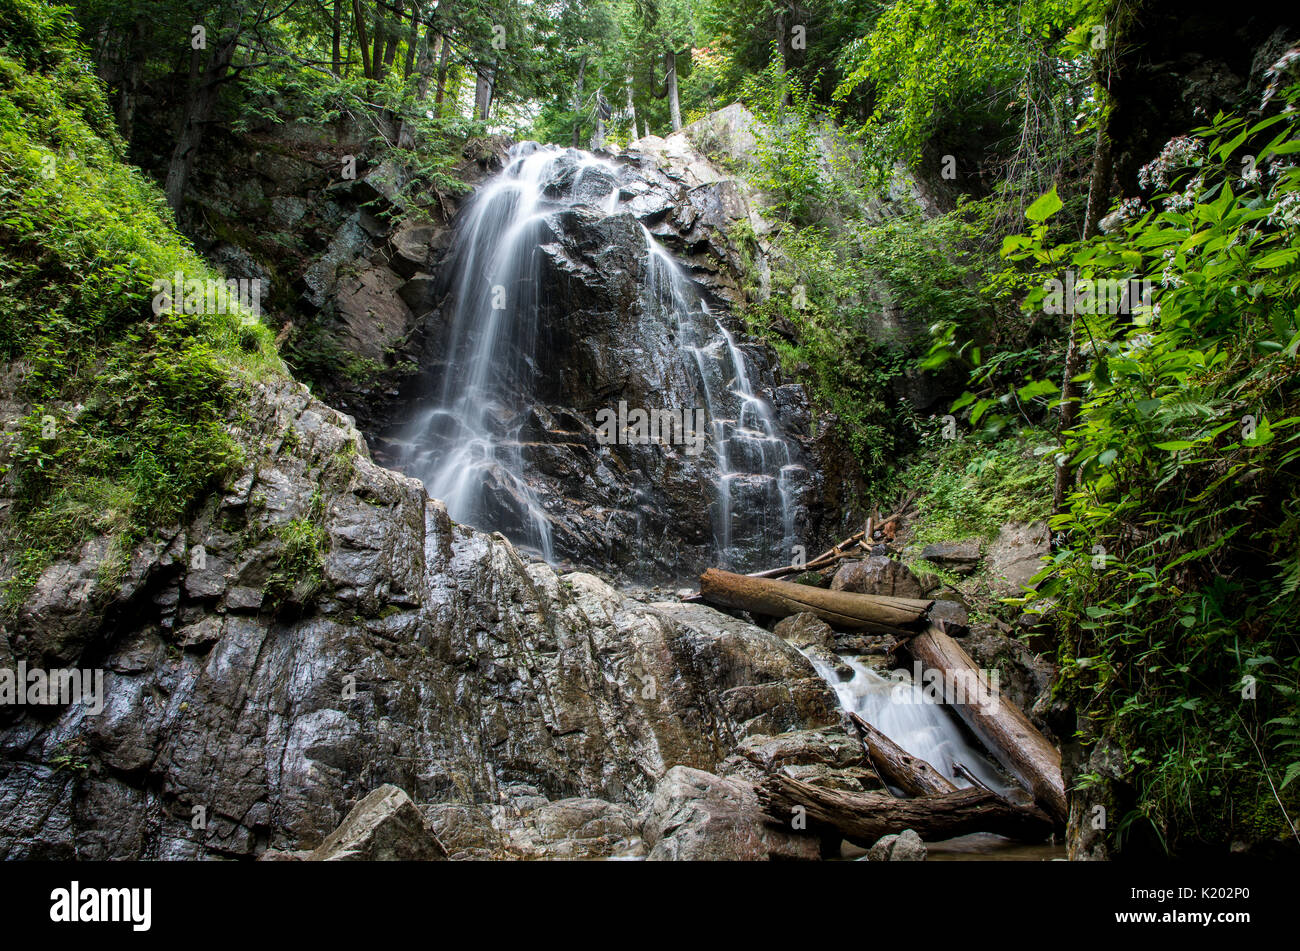 Cascate lungo il torrente Cervo Trail in montagna hiteface in Wilmington NY Foto Stock